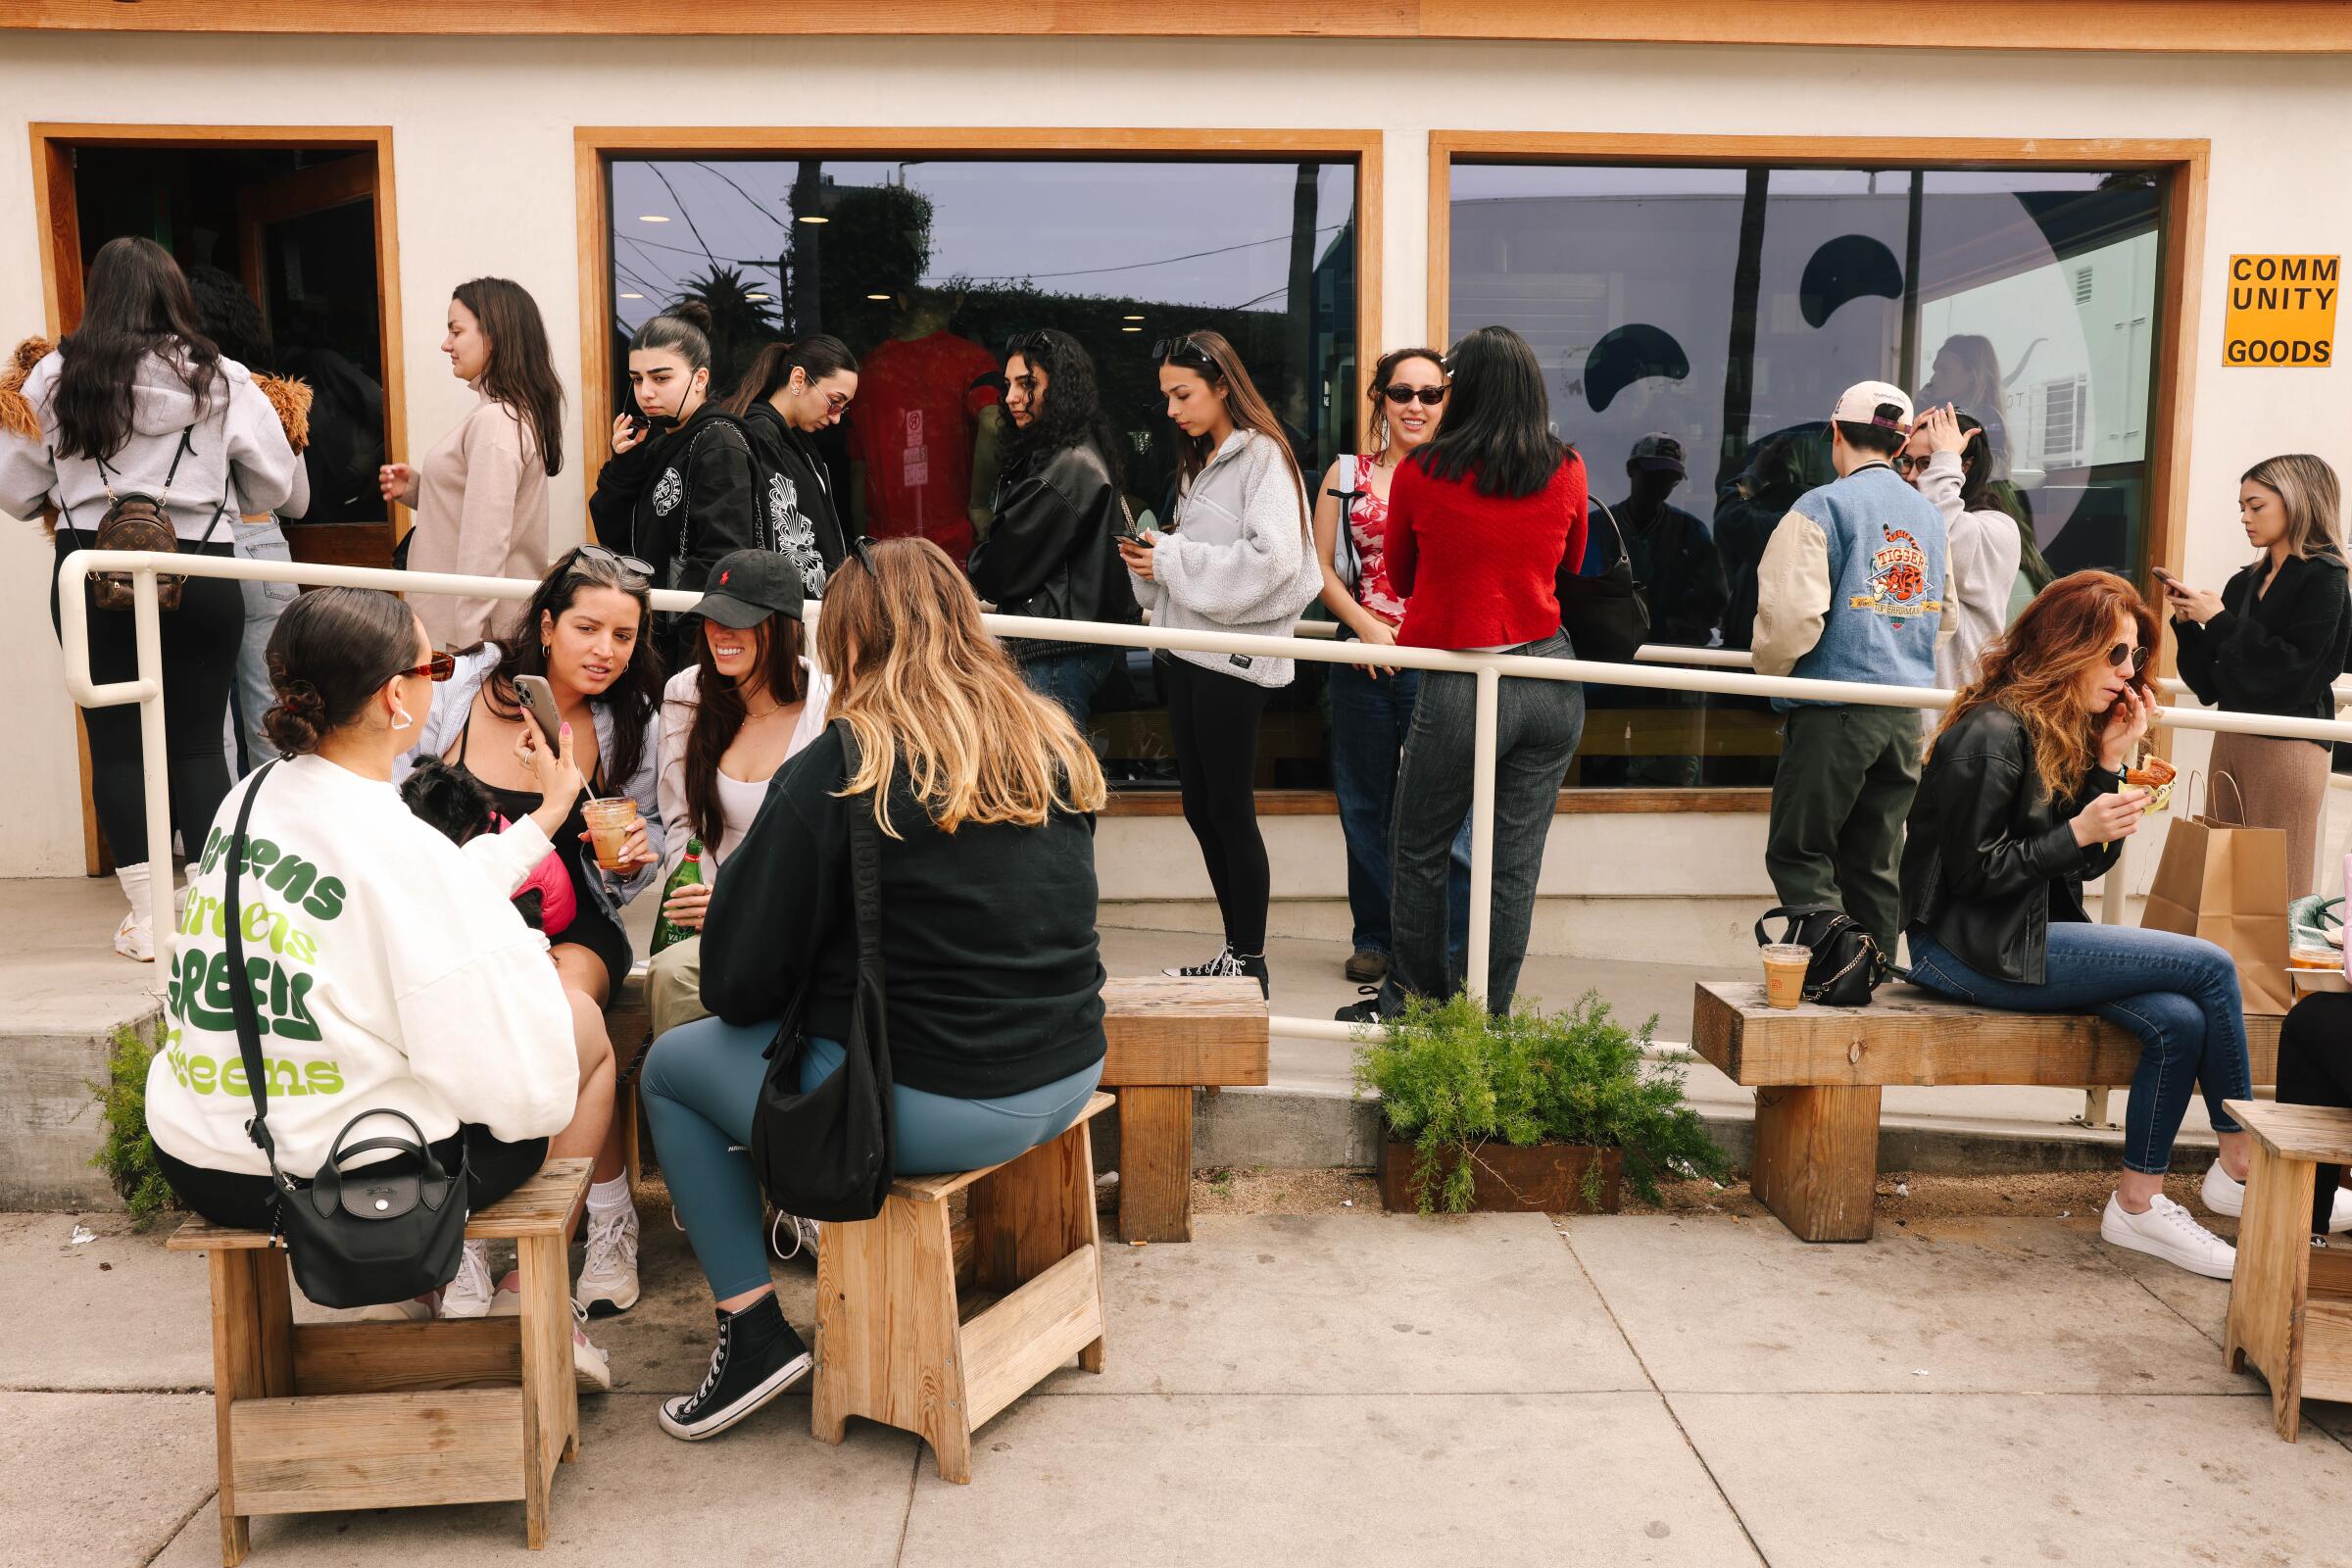 Why is Gen Z waiting an hour for coffee at Community Goods? - Los